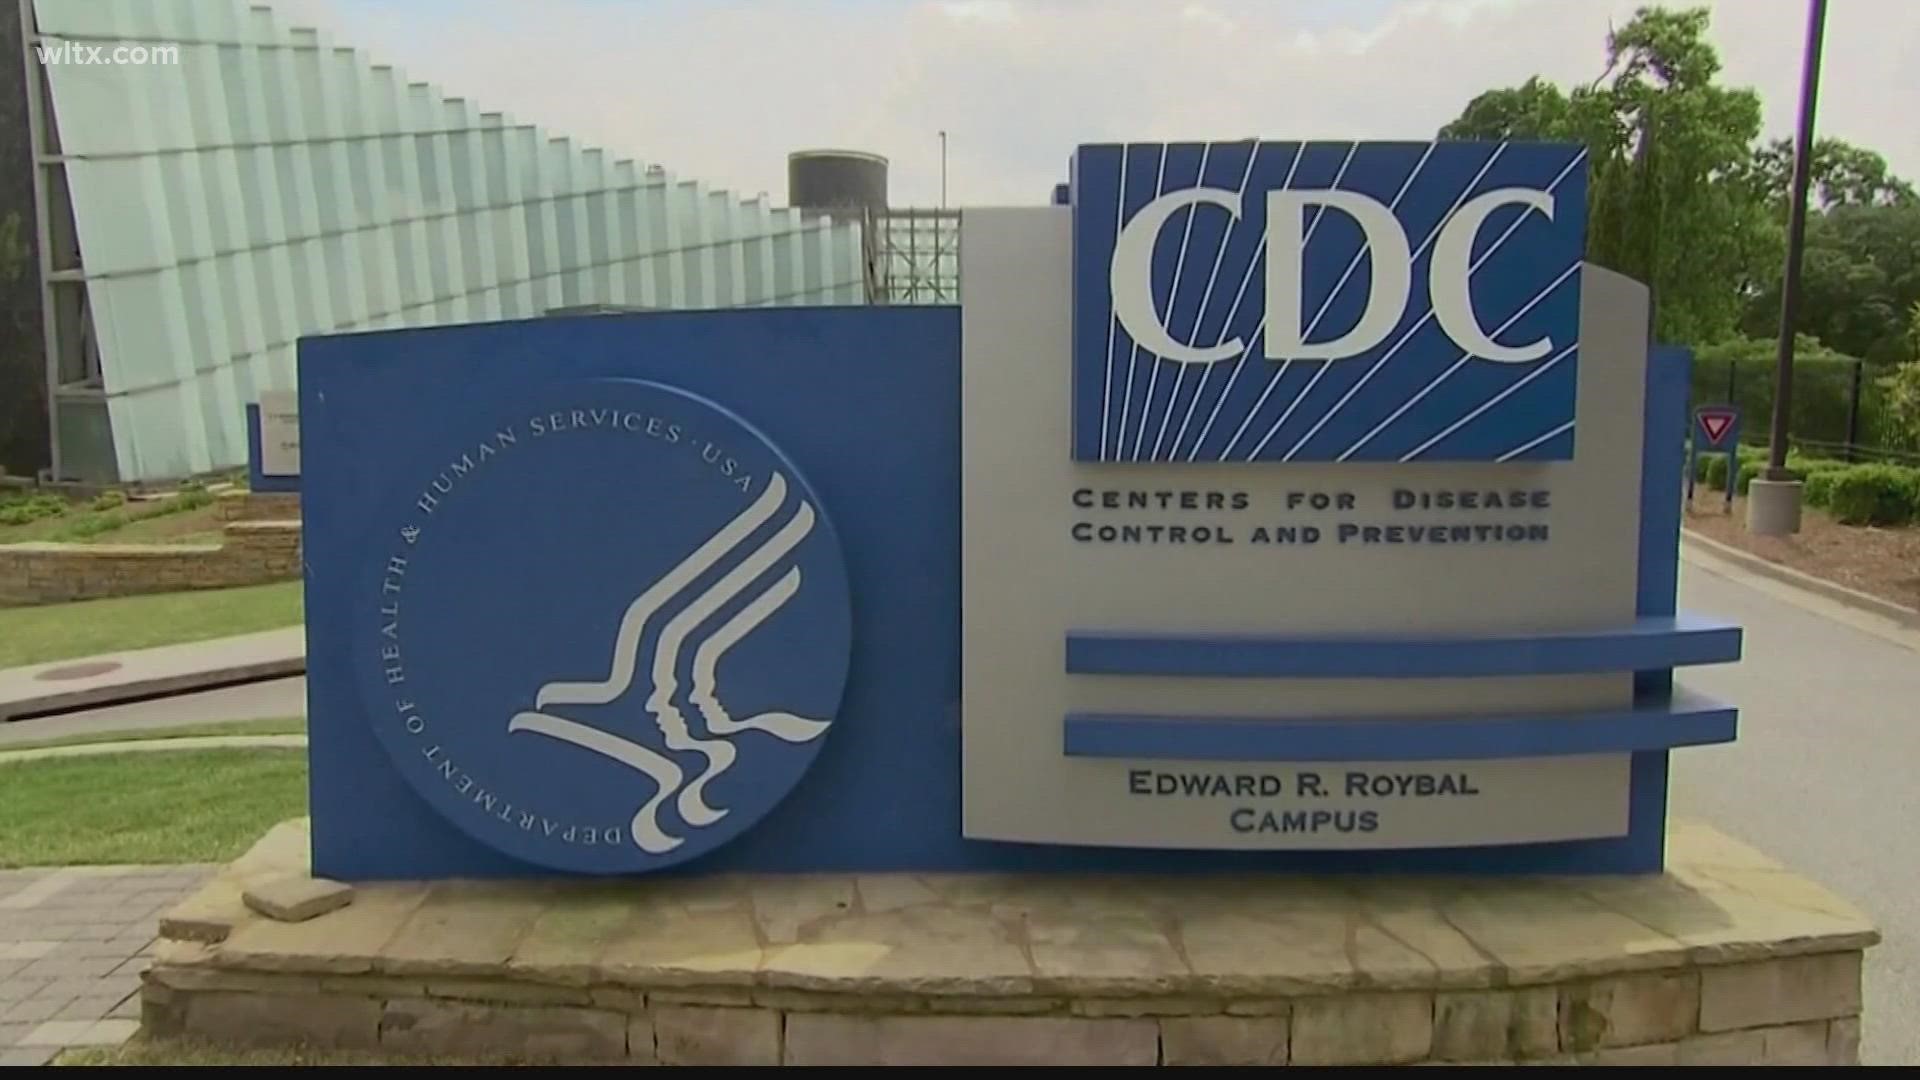 It’s customary for each CDC director to do some reorganizing, but this action comes amid a wider demand for change.